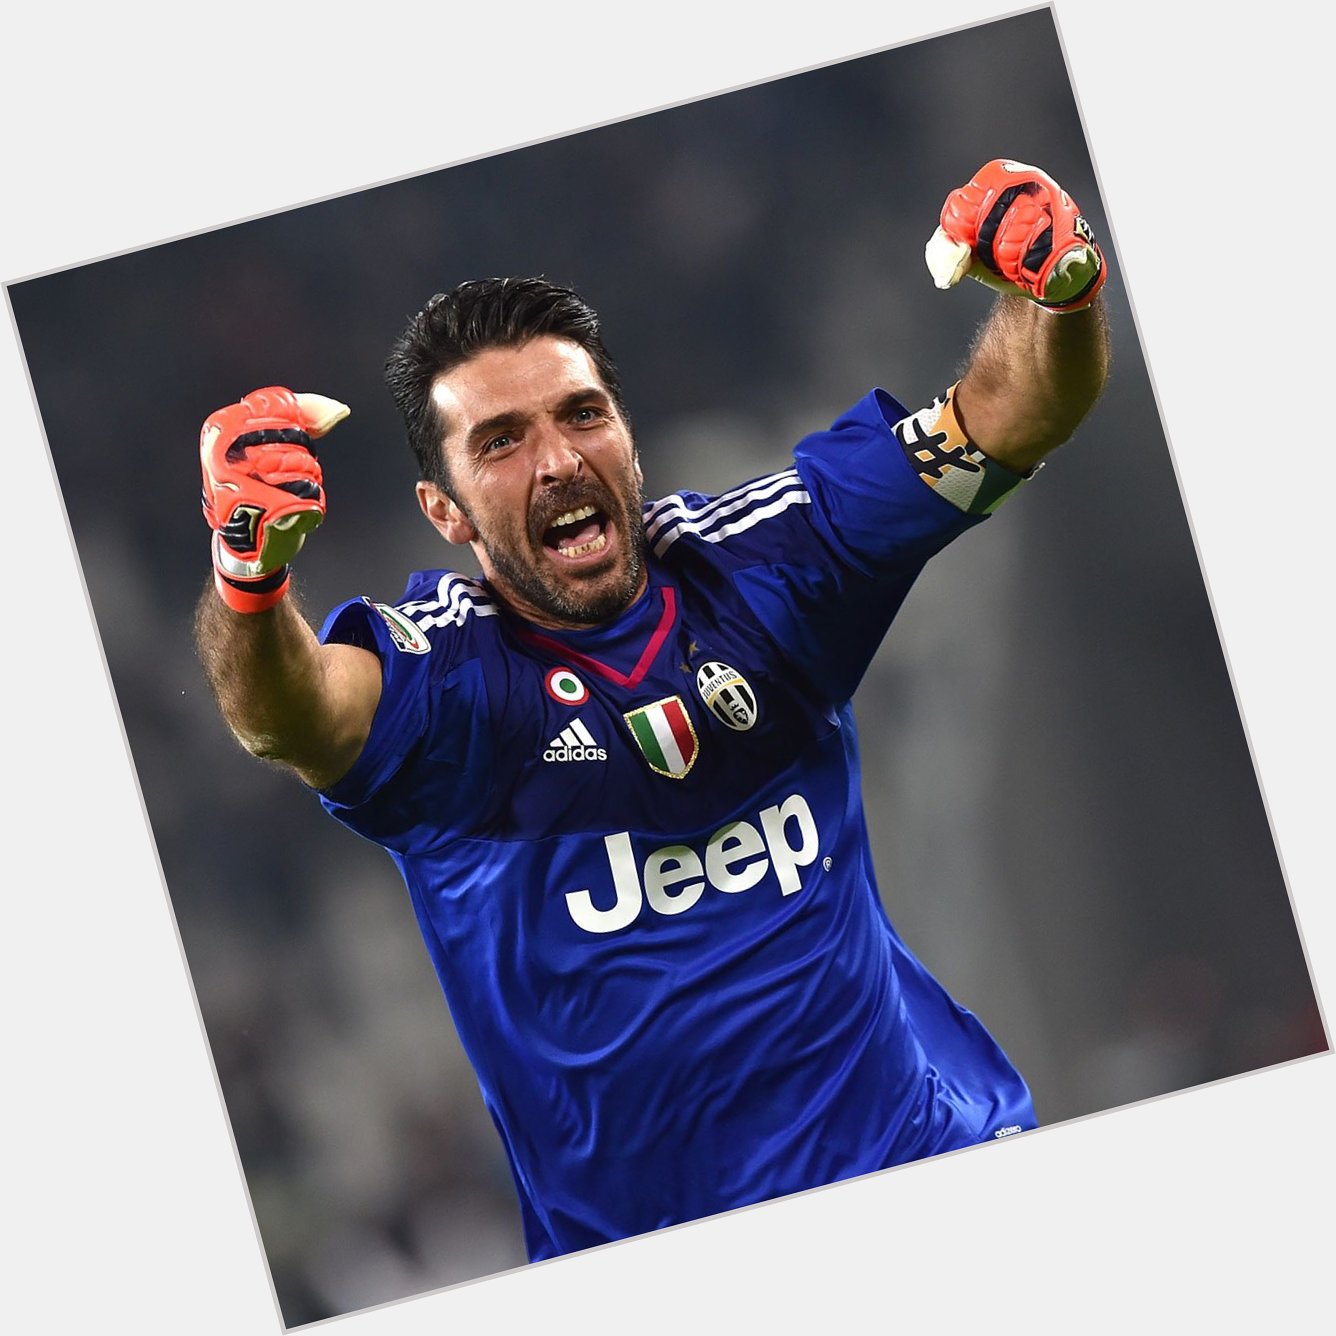 A big happy 41st birthday to Gianluigi Buffon The best goalkeeper in the history of the game? 